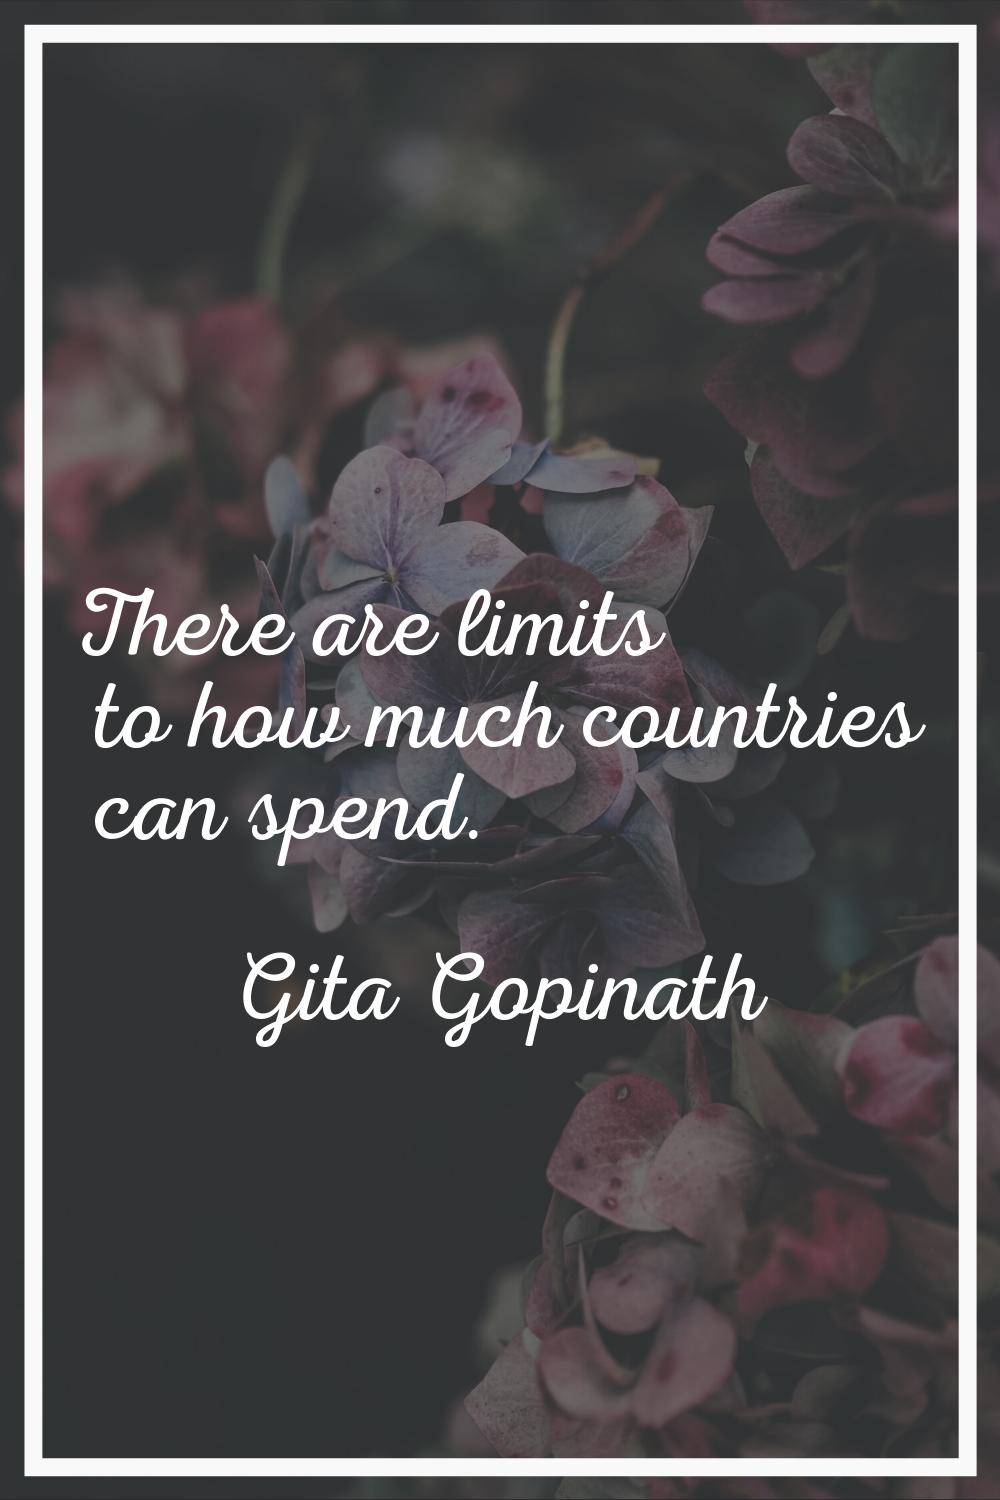 There are limits to how much countries can spend.